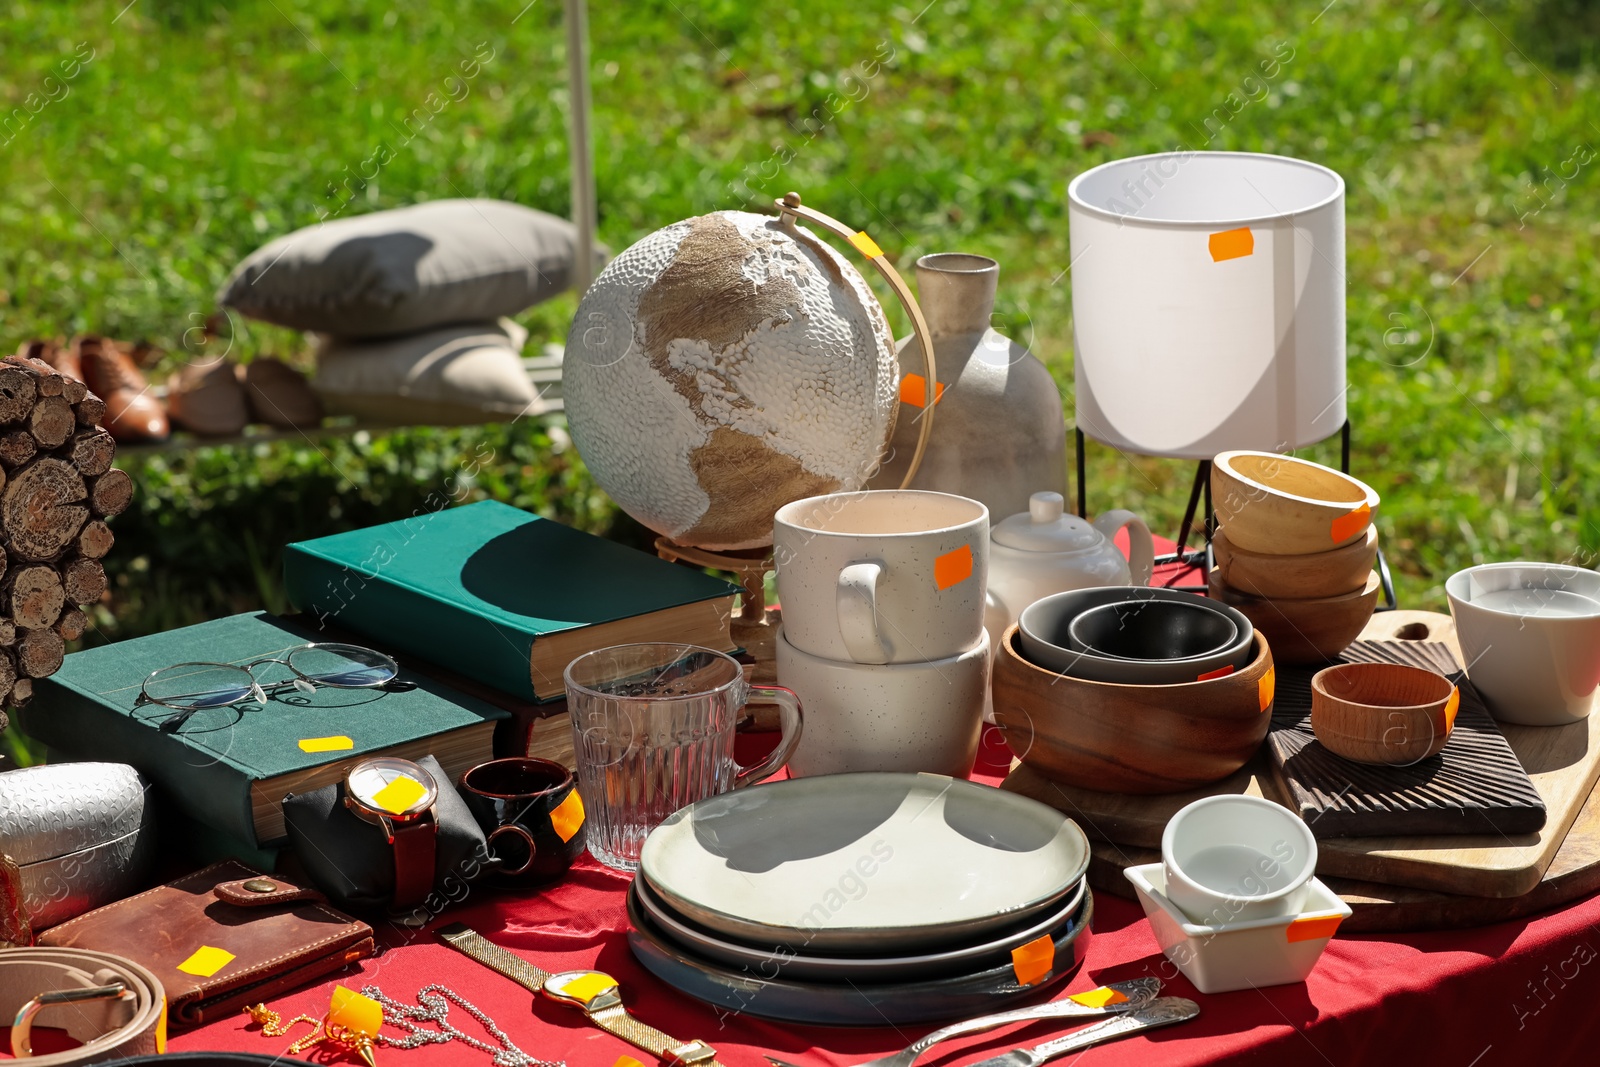 Photo of Many different items on table outdoors. Garage sale